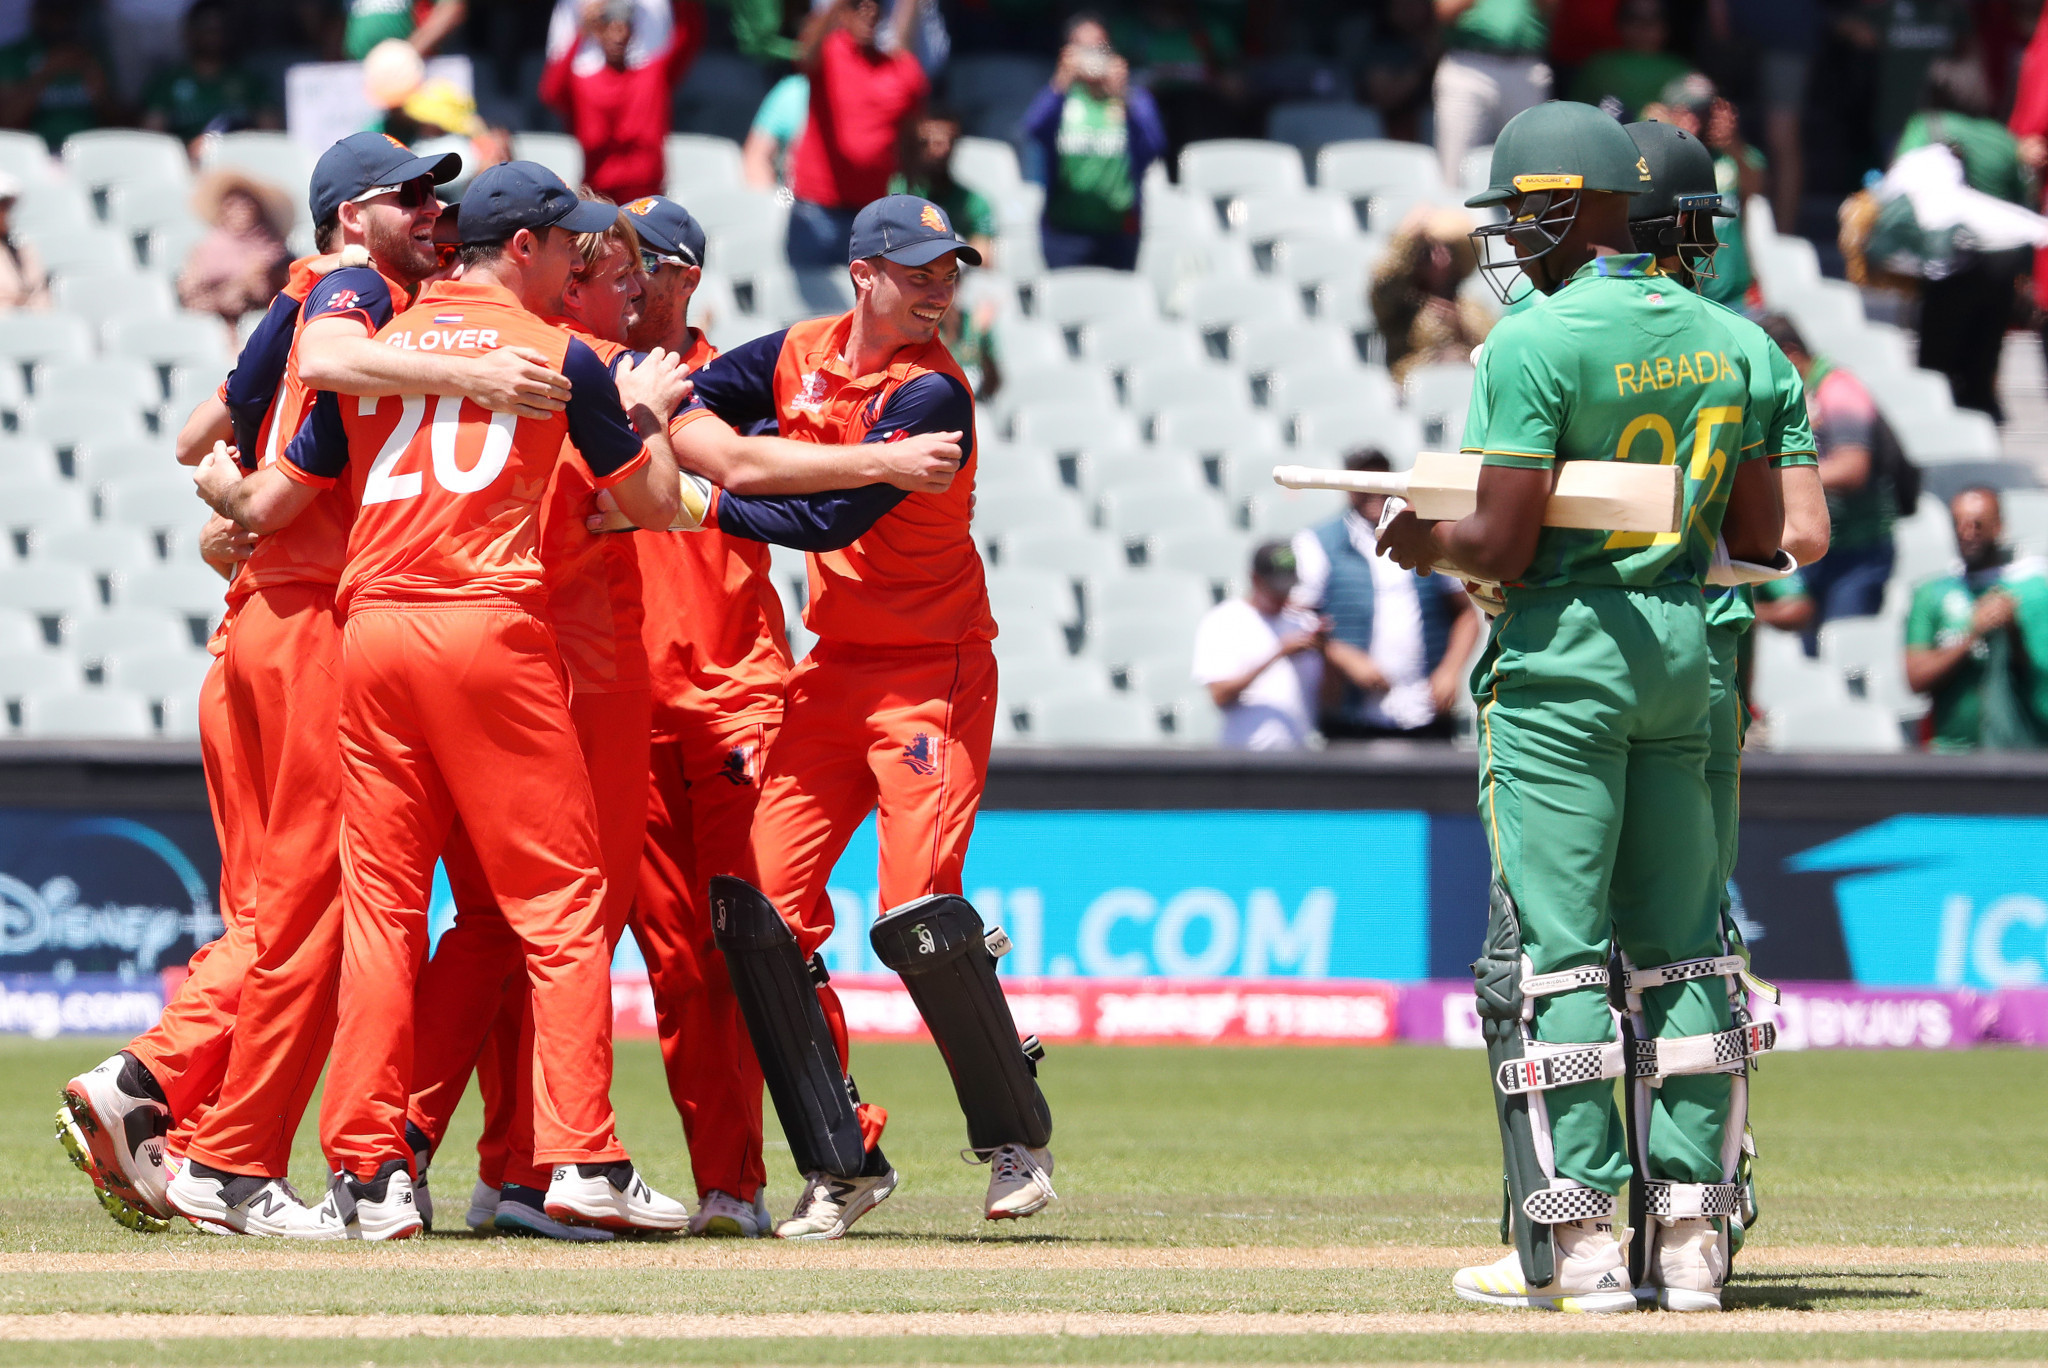 Netherlands knock South Africa out of T20 World Cup, Pakistan beat Bangladesh to advance